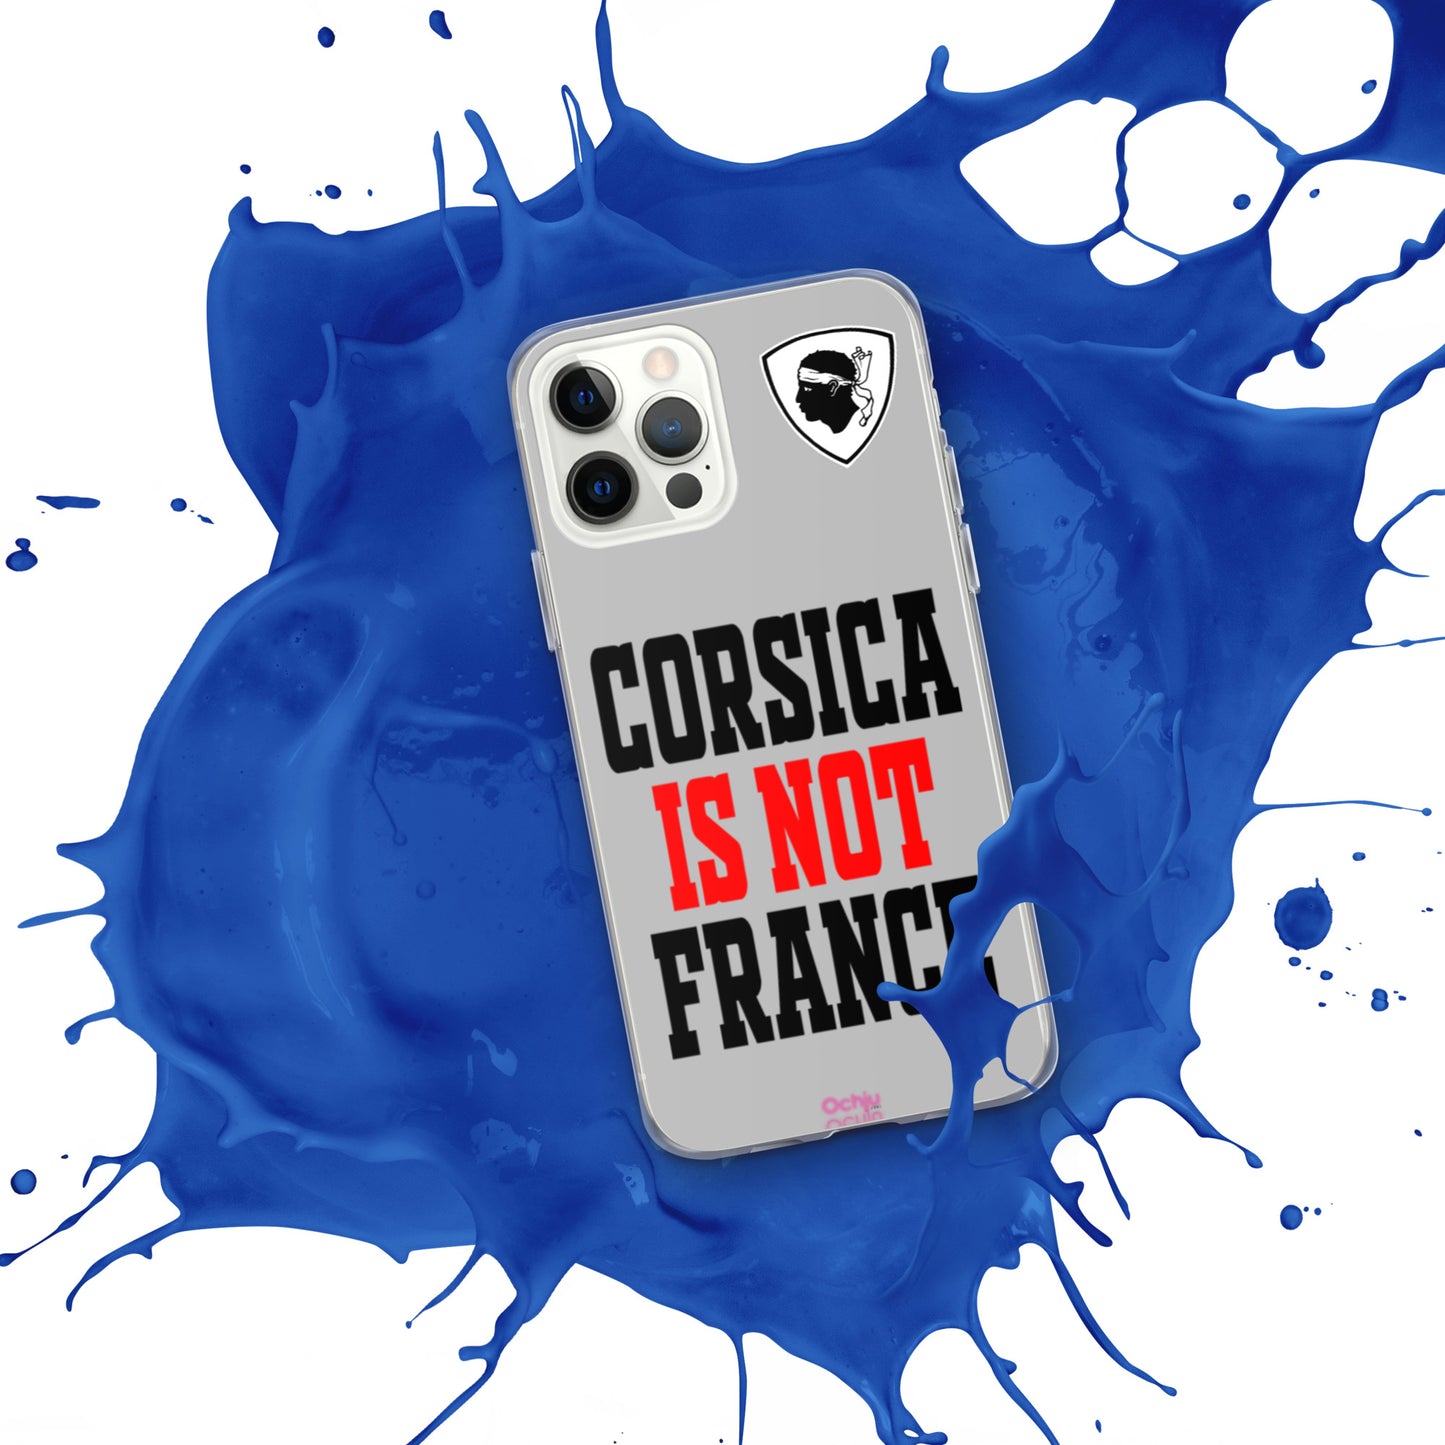 Coque pour iPhone Corsica is not France - Ochju Ochju iPhone 12 Pro Max Ochju Coque pour iPhone Corsica is not France